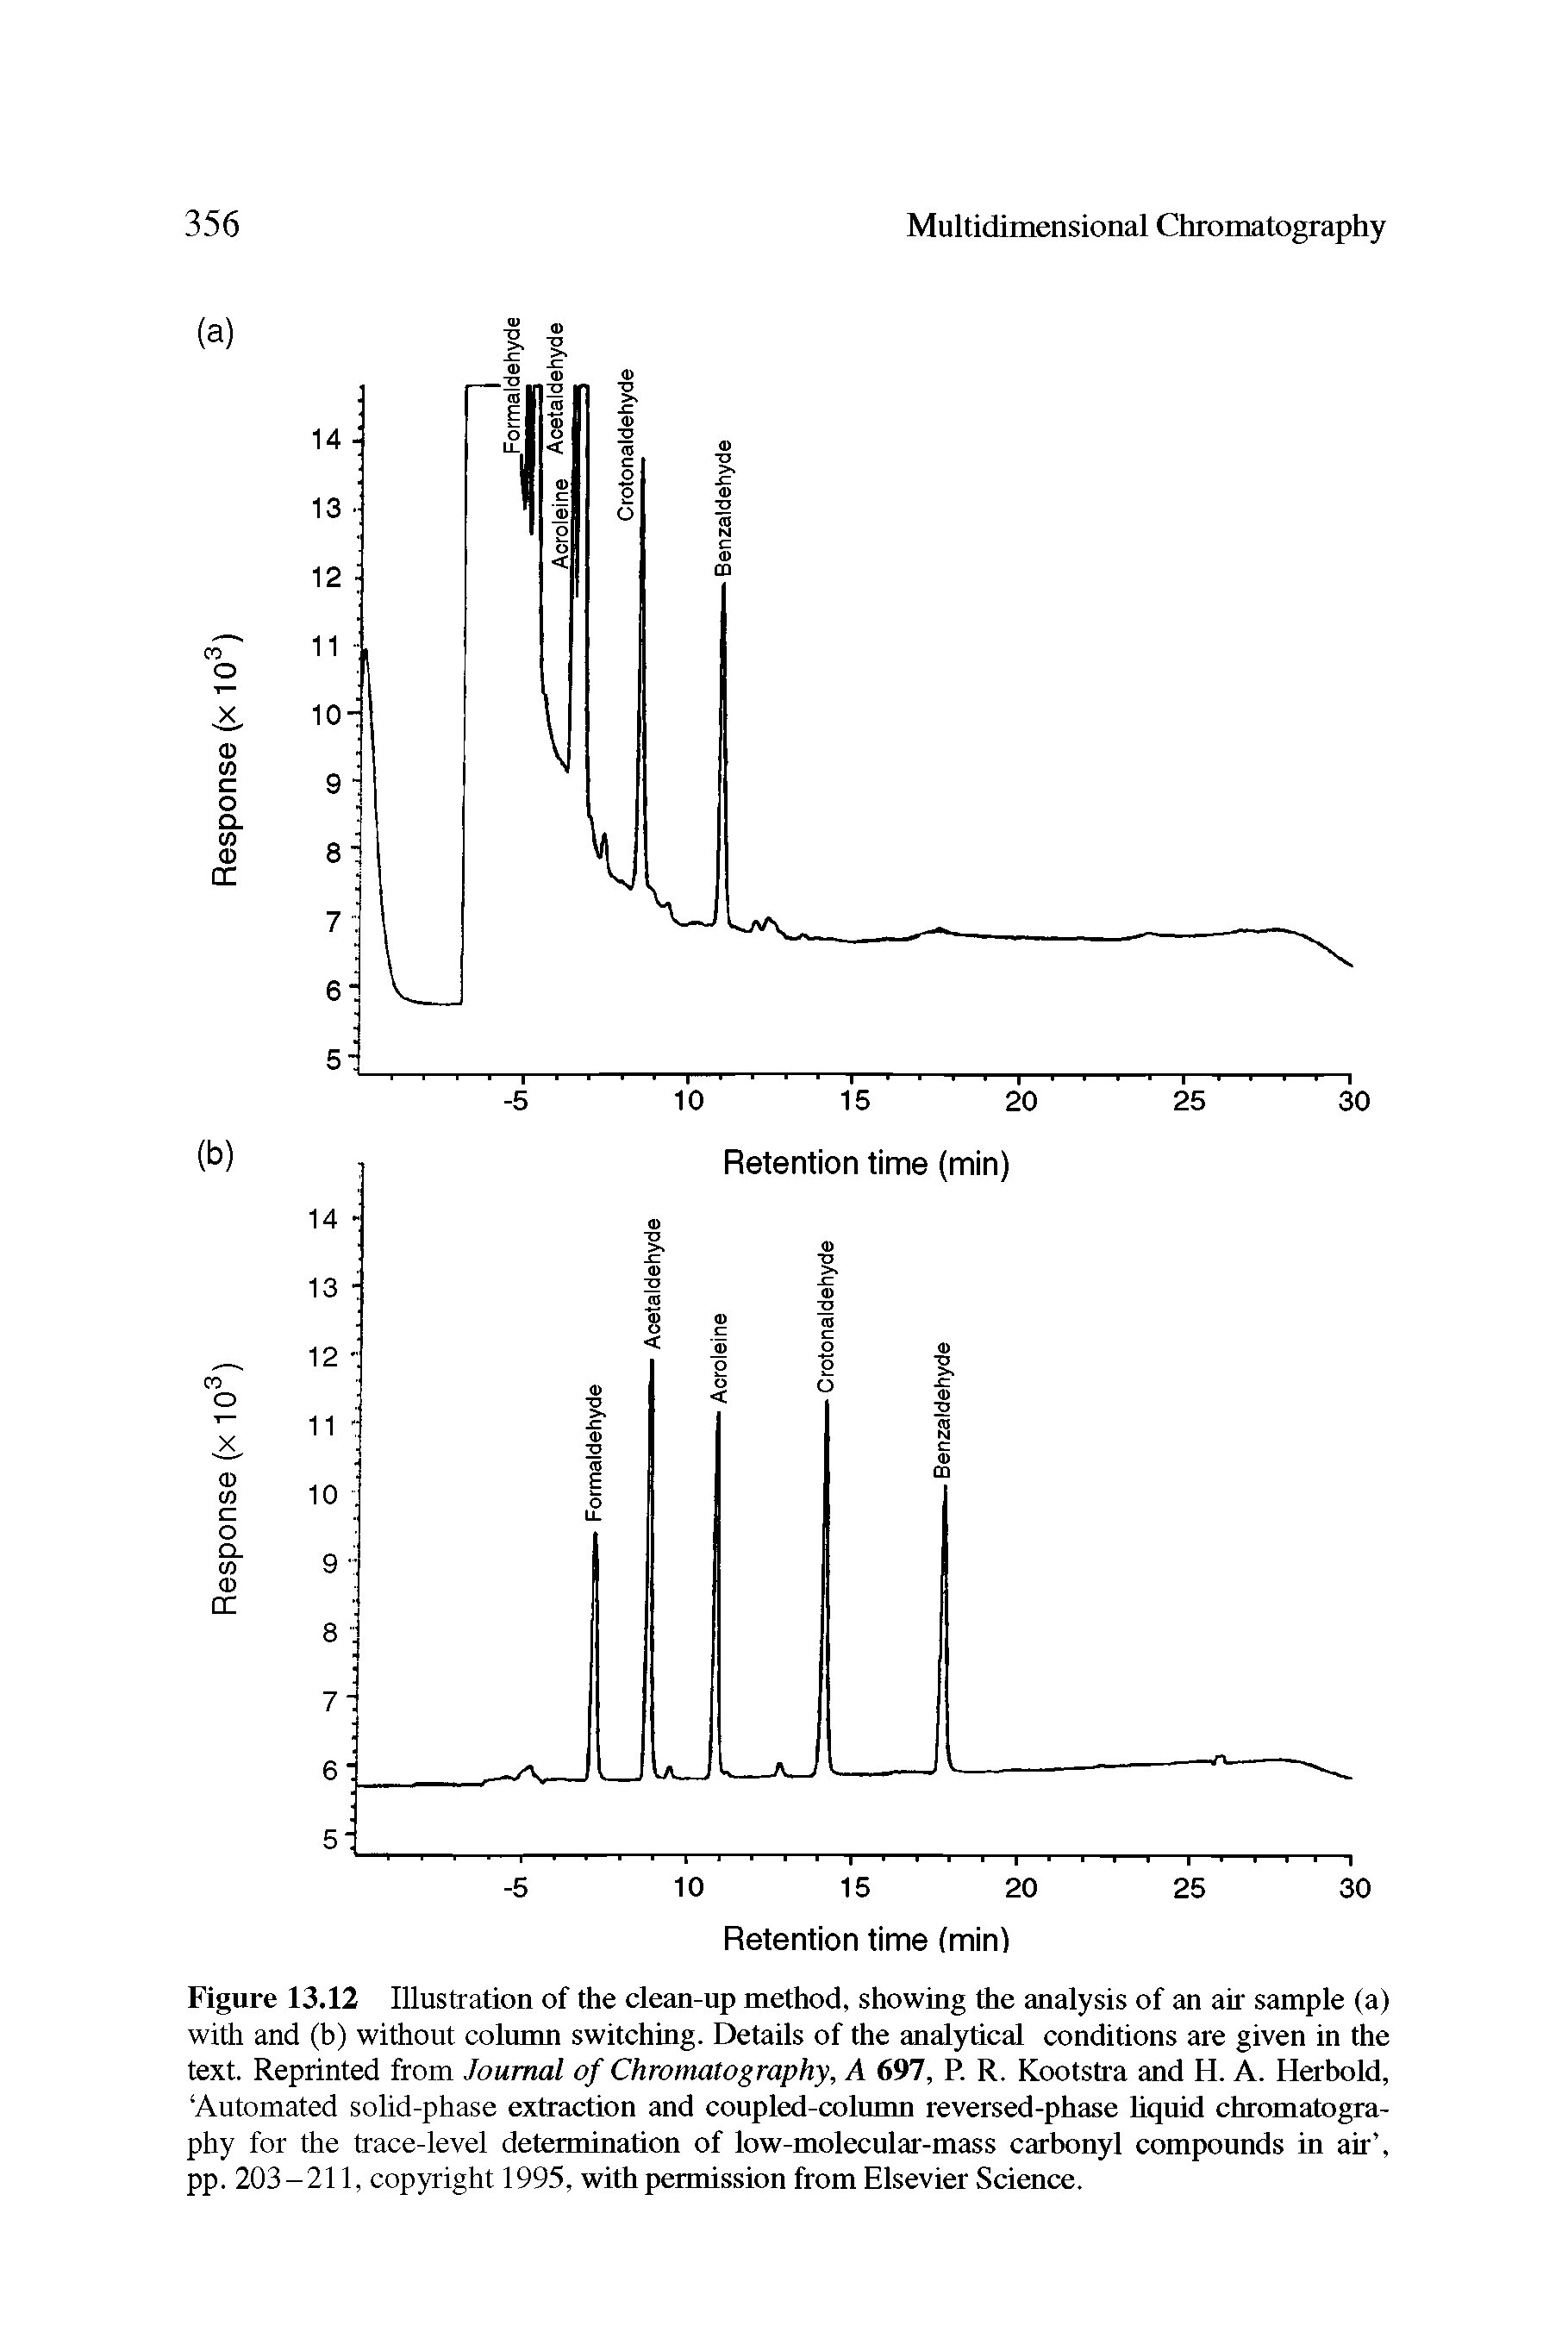 Figure 13.12 Illustration of the clean-up method, showing the analysis of an air sample (a) with and (b) without column switching. Details of the analytical conditions are given in the text. Reprinted from Journal of Chromatography, A 697, P. R. Kootstra and H. A. Herbold, Automated solid-phase extraction and coupled-column reversed-phase liquid chromatography for the trace-level determination of low-molecular-mass carbonyl compounds in air , pp. 203-211, copyright 1995, with permission from Elsevier Science.